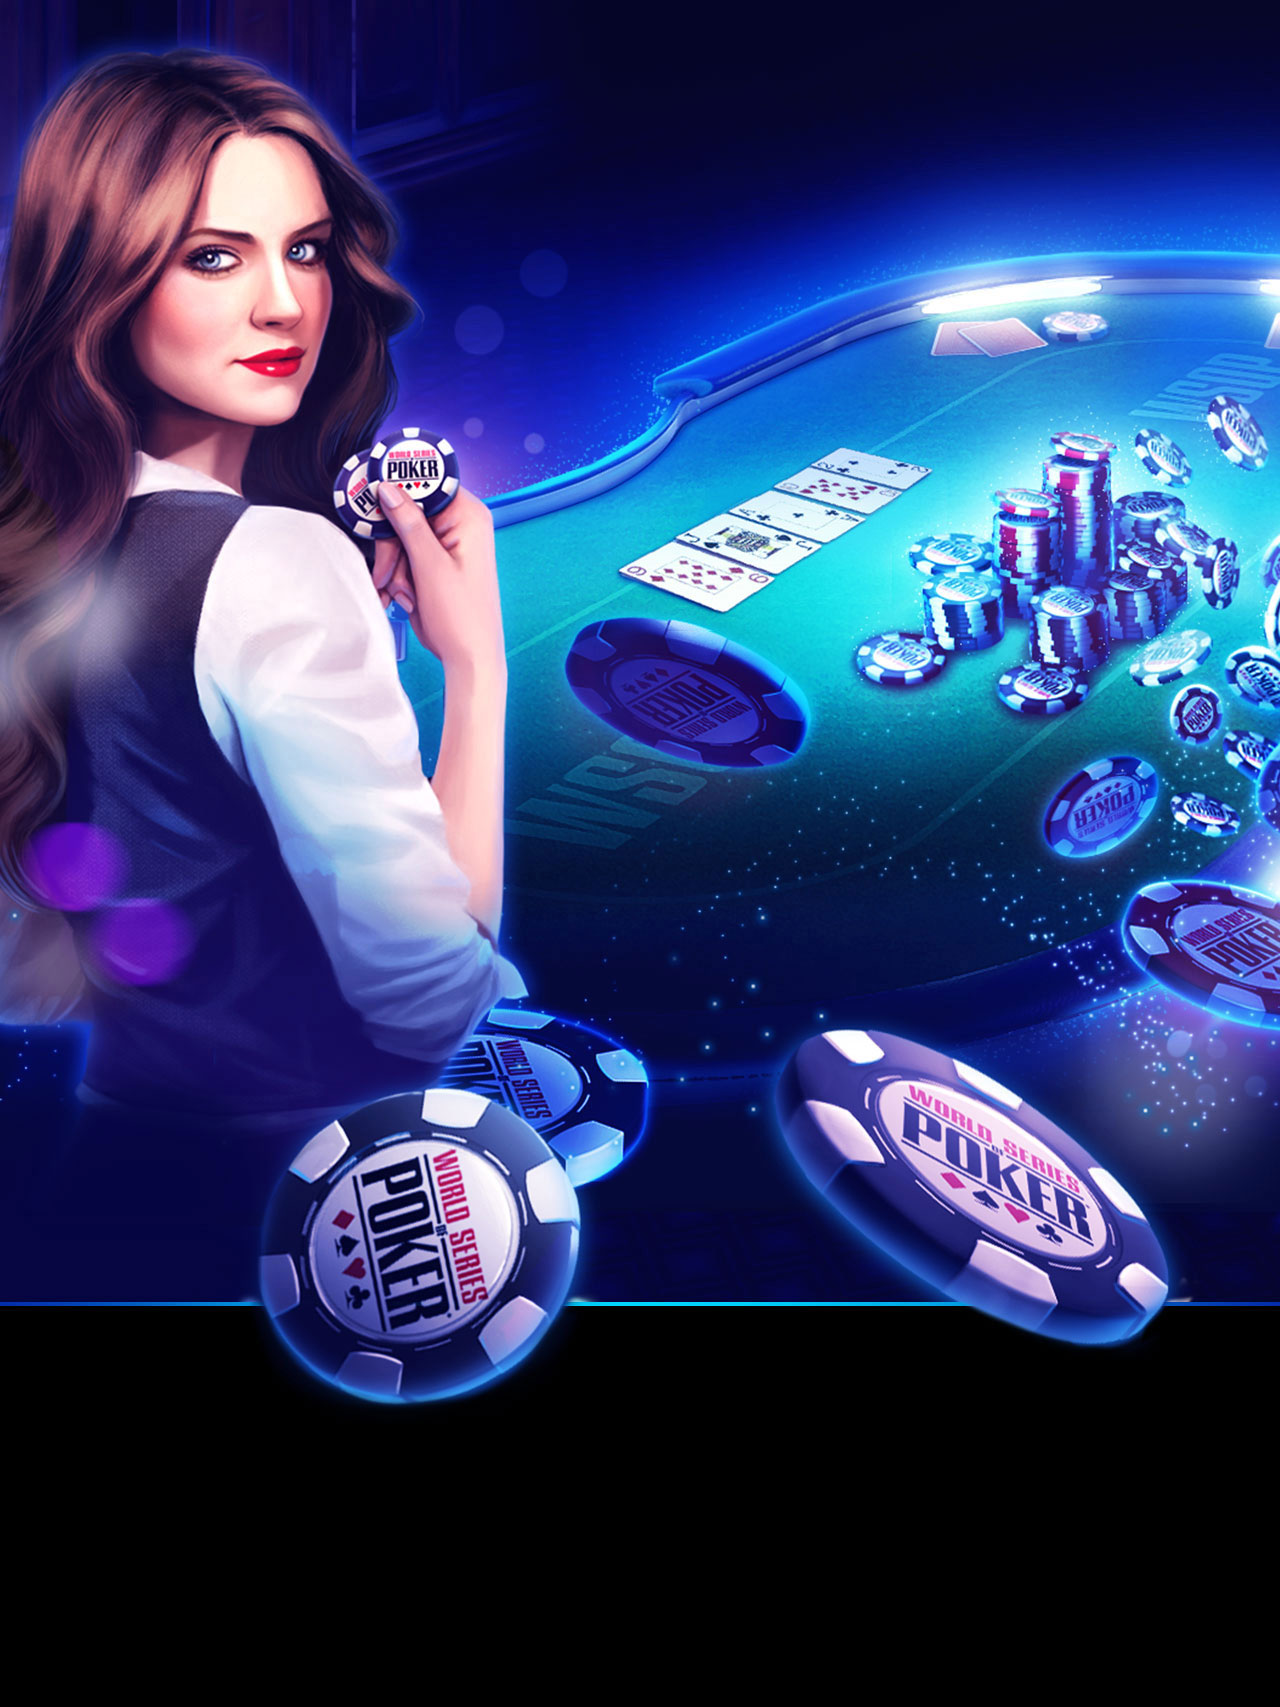 Play Free Online Poker Games